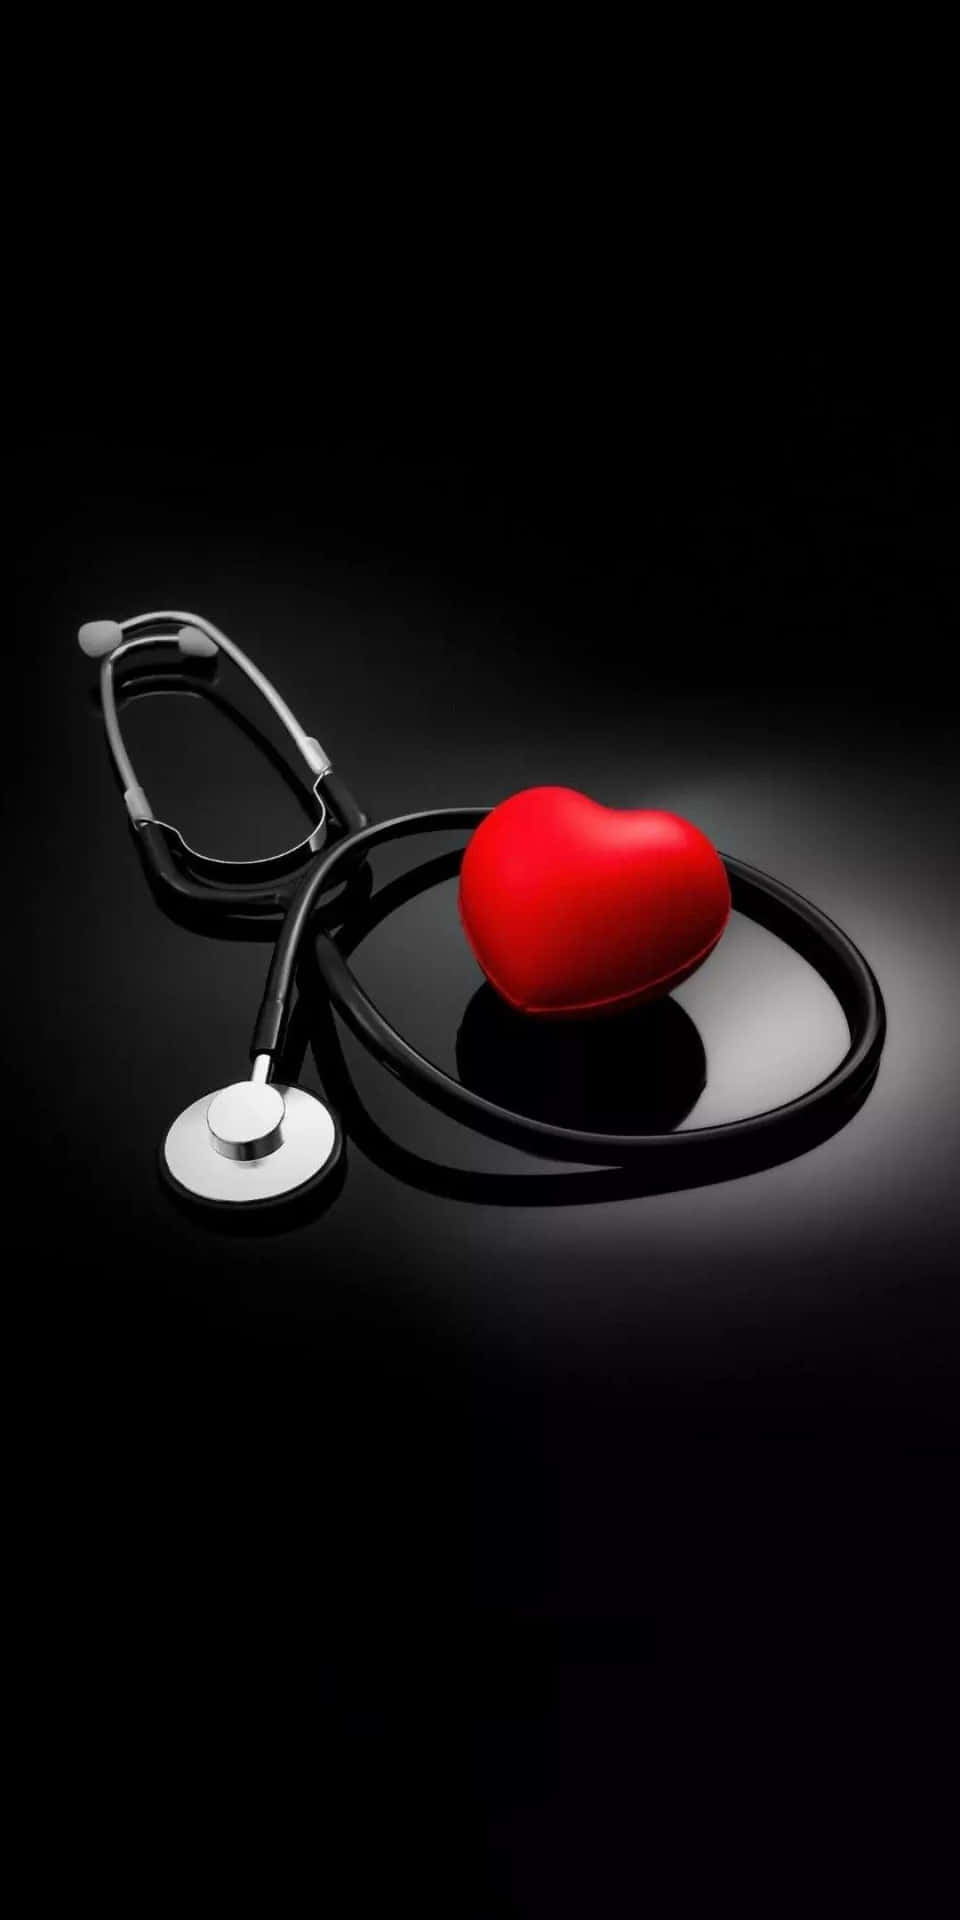 A Stethoscope And A Red Heart On A Black Background